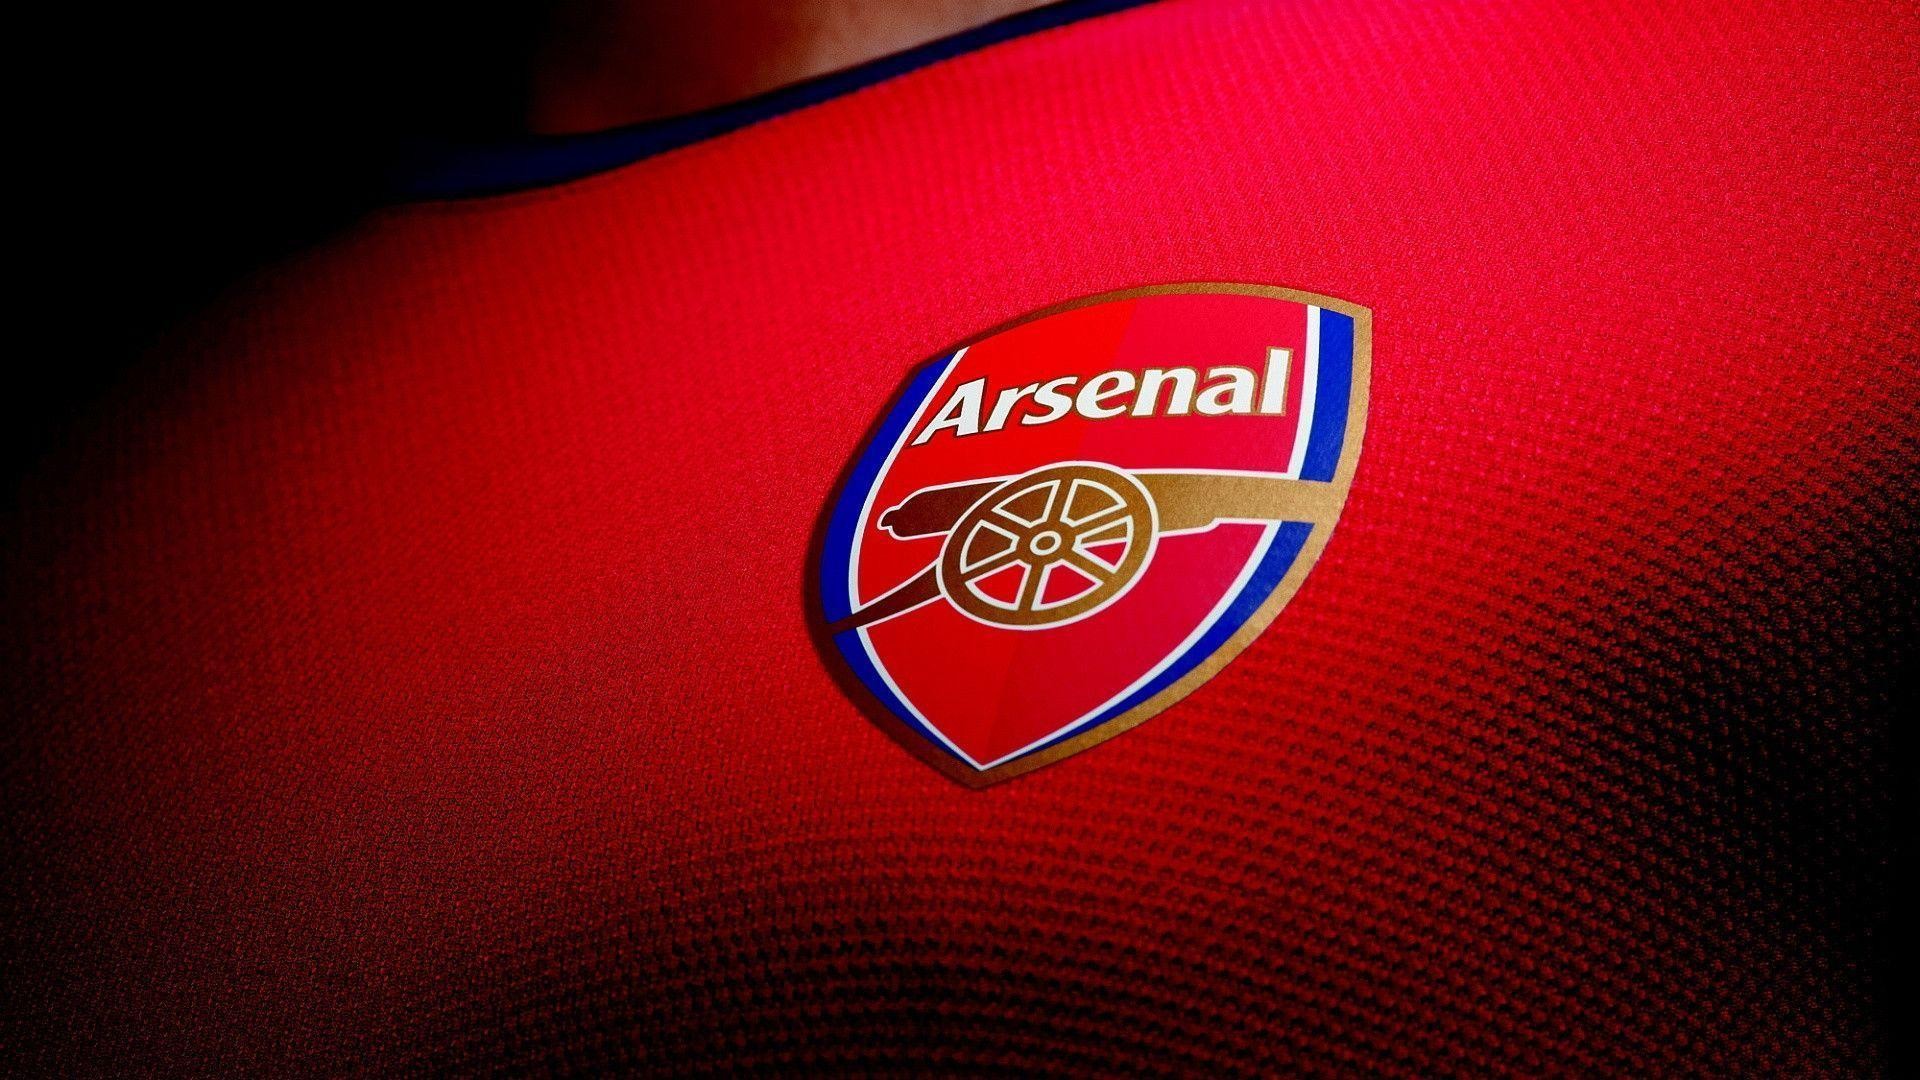 HD Arsenal Wallpapers with high-resolution 1920x1080 pixel. You can use this wallpaper for your Desktop Computers, Mac Screensavers, Windows Backgrounds, iPhone Wallpapers, Tablet or Android Lock screen and another Mobile device